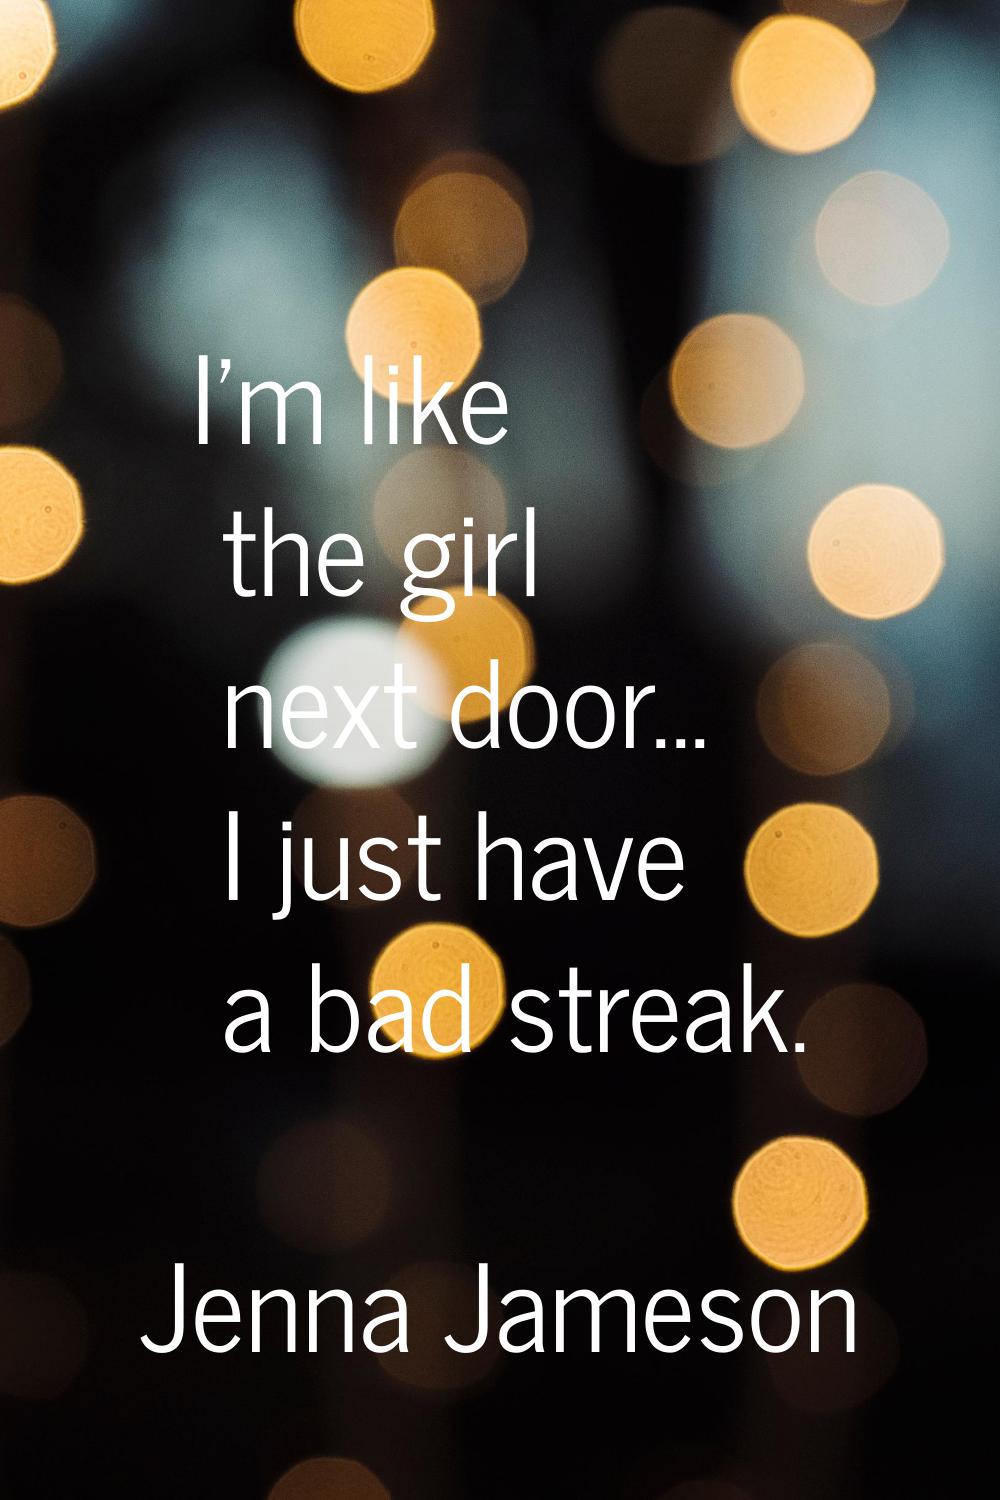 I'm like the girl next door... I just have a bad streak.